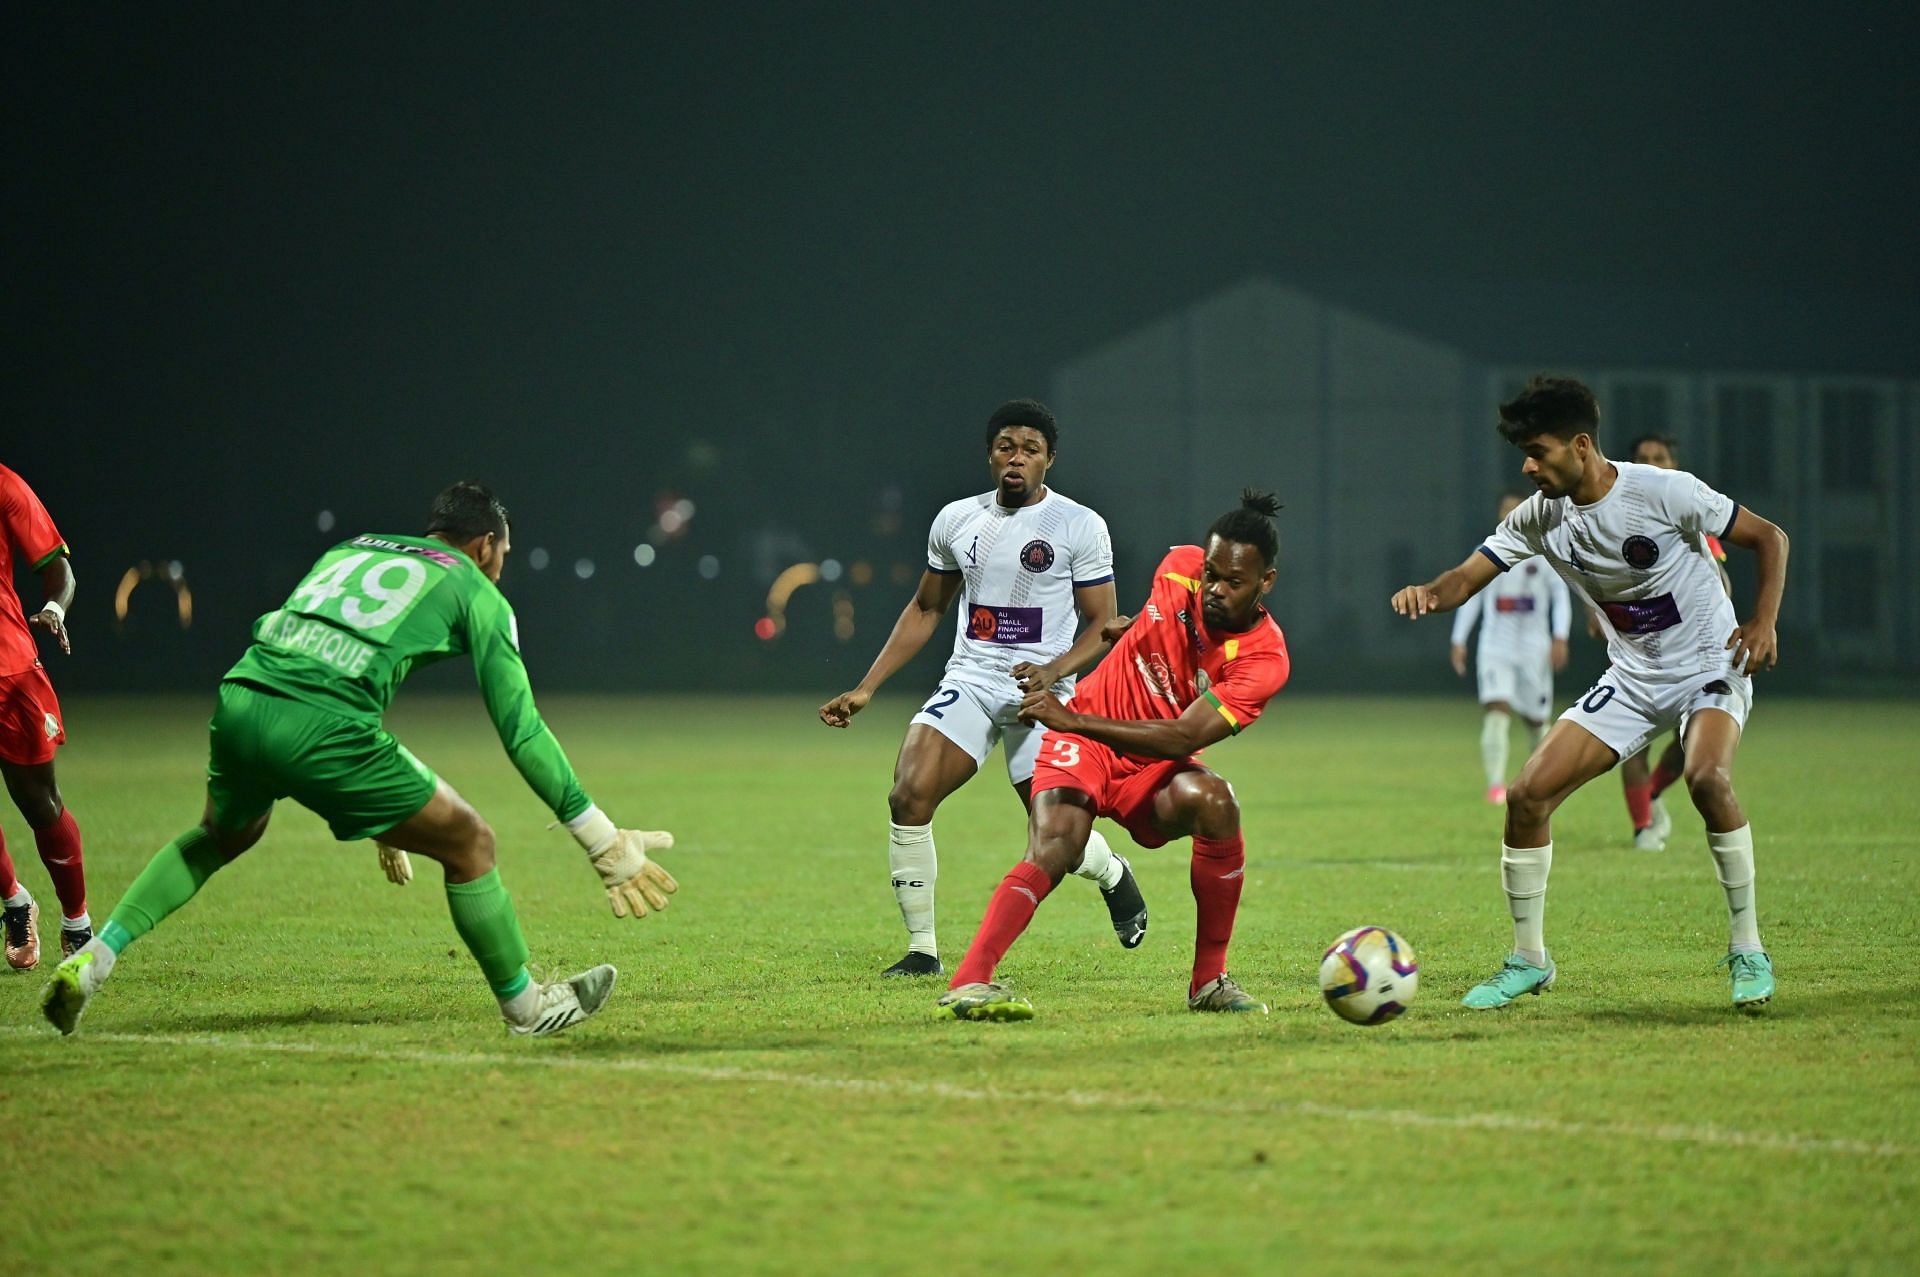 Rajasthan FC and TRAU in action during their I-League match (Image Credits: I-League Twitter)